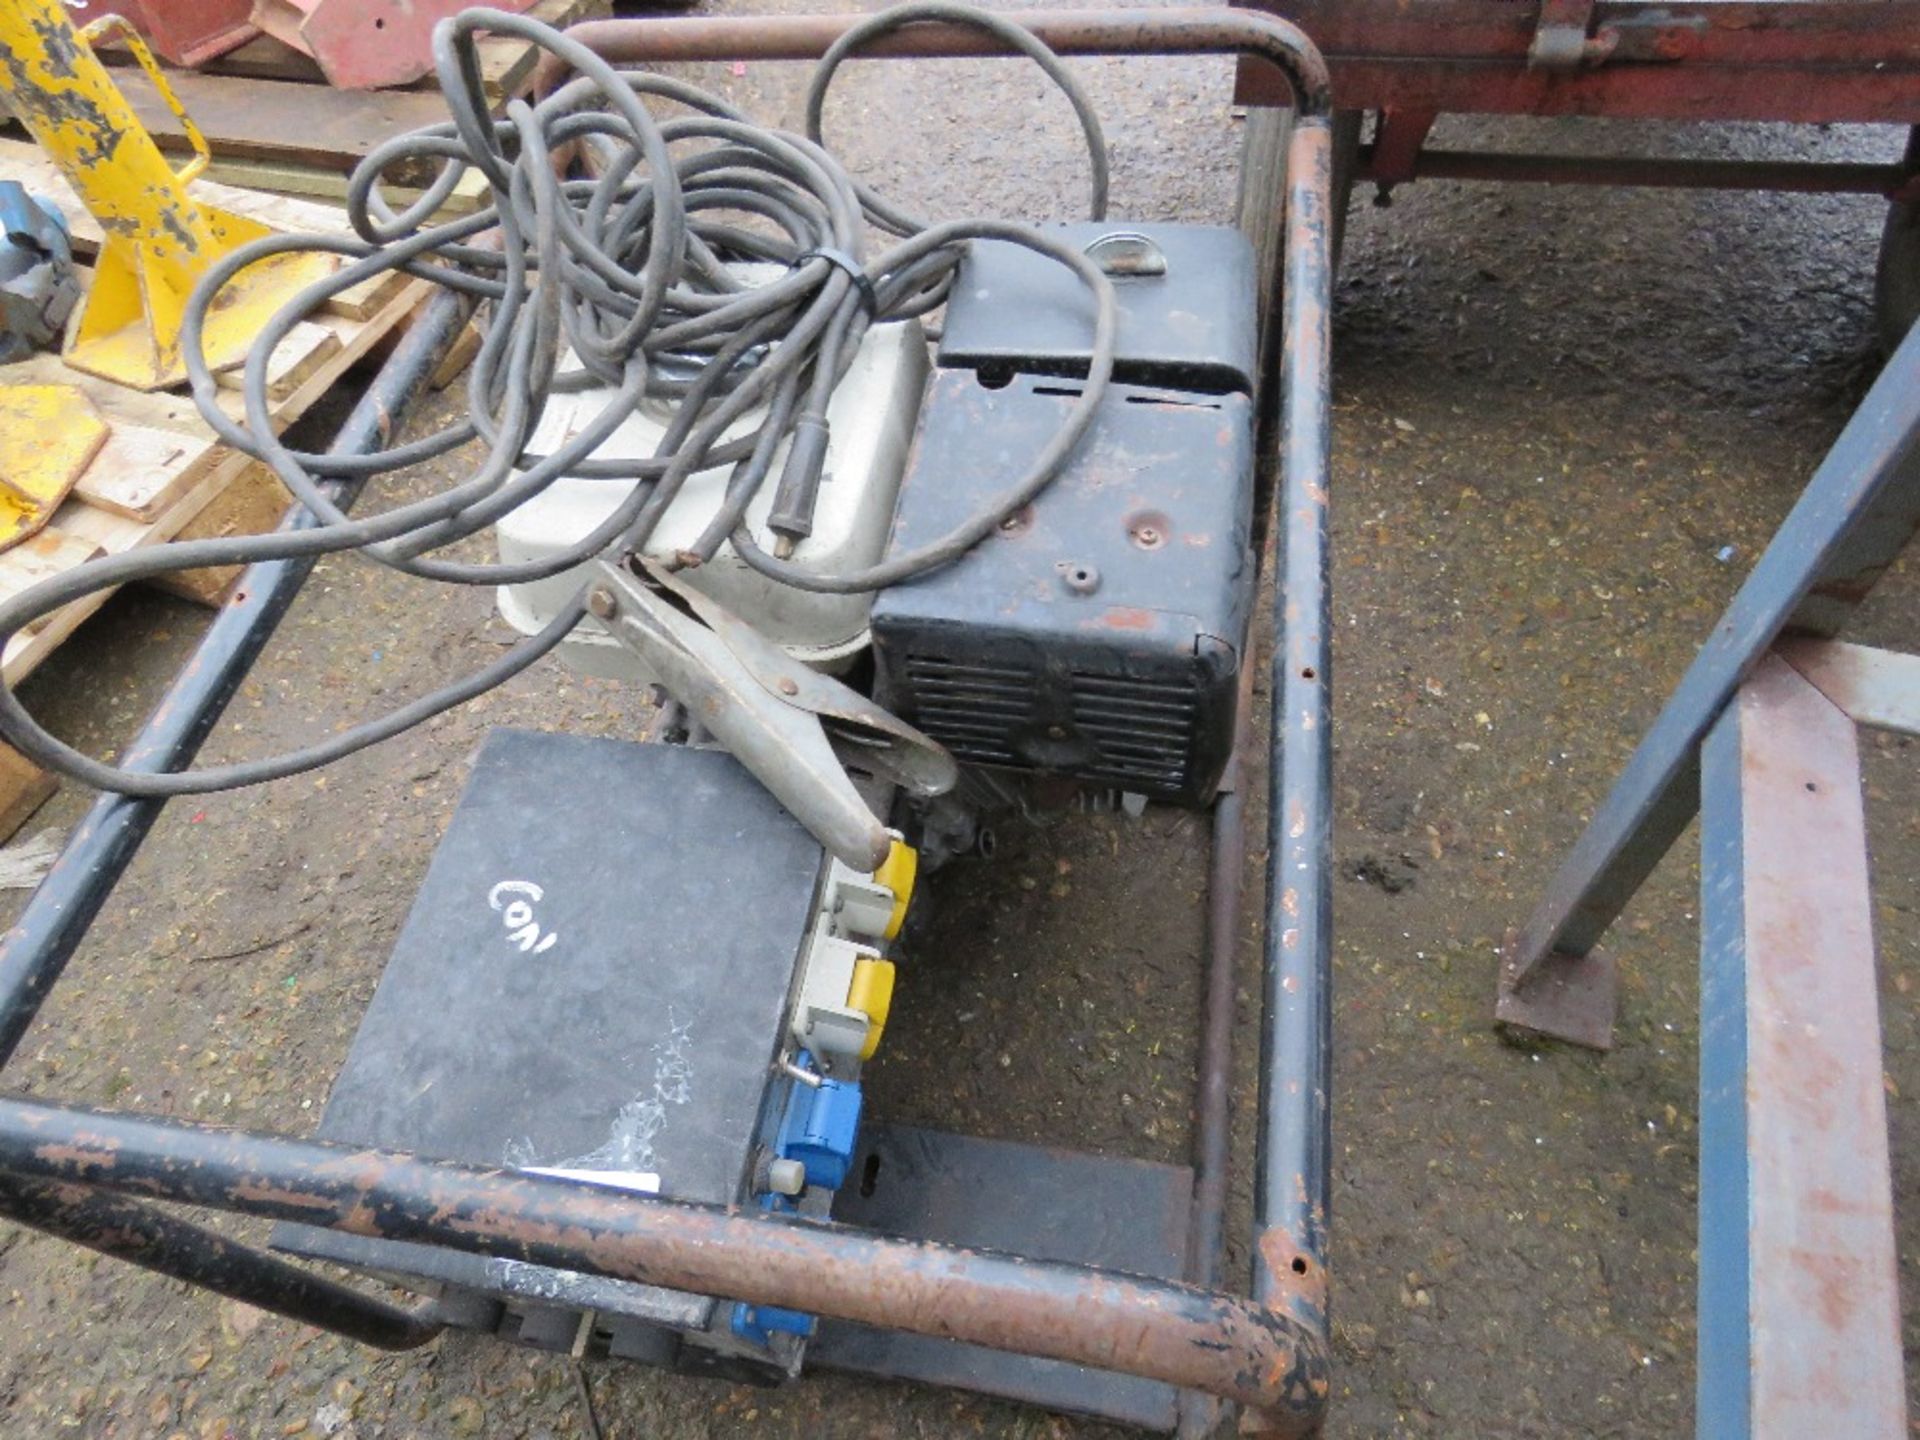 HONDA ENGINED WELDER UNIT WITH LEADS. WHEN TESTED WAS SEEN TO RUN, OUTPUT WAS NOT TESTED. - Image 2 of 2